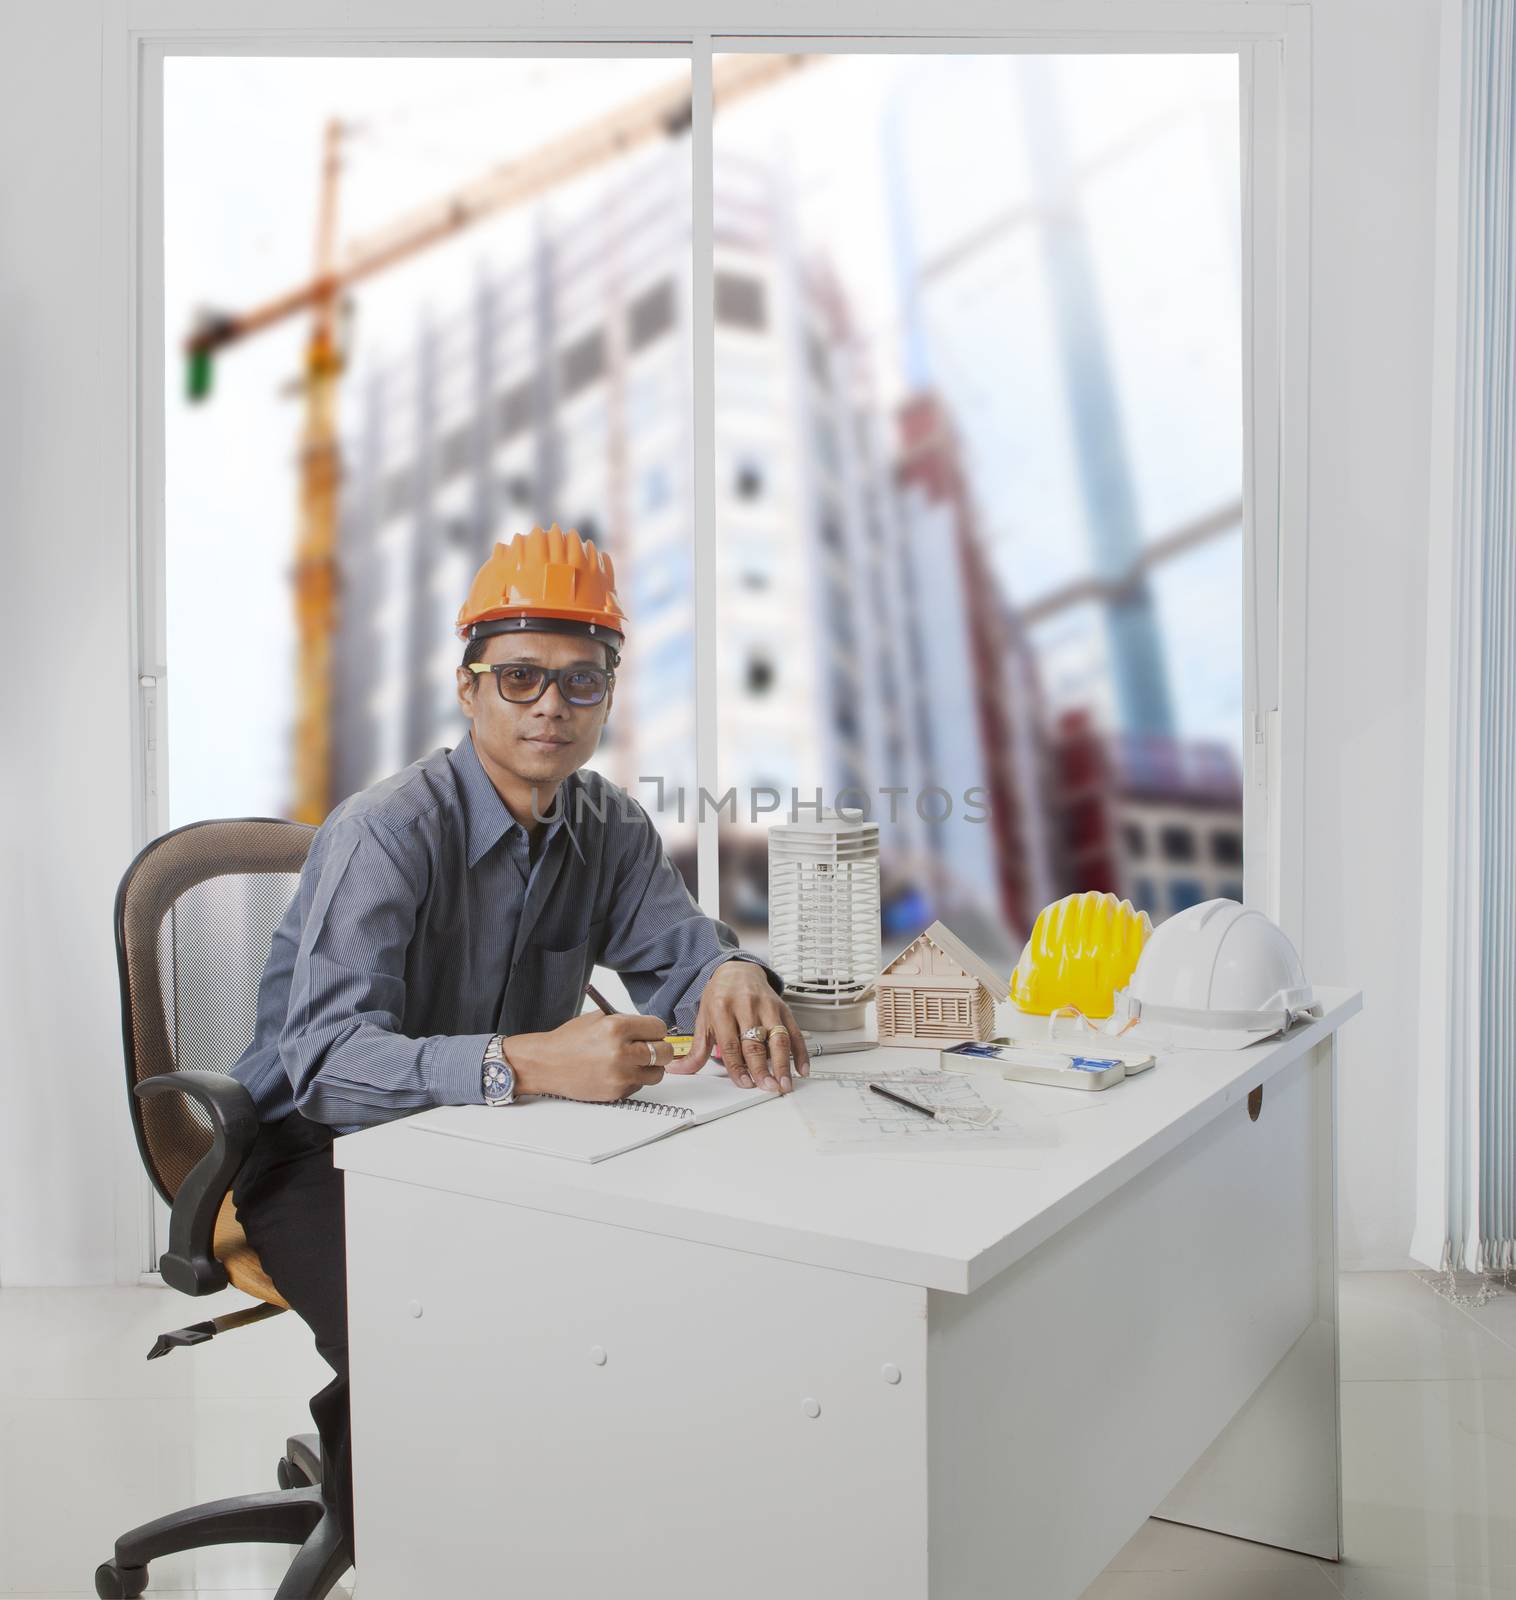 architect engineer working in office room against building const by khunaspix